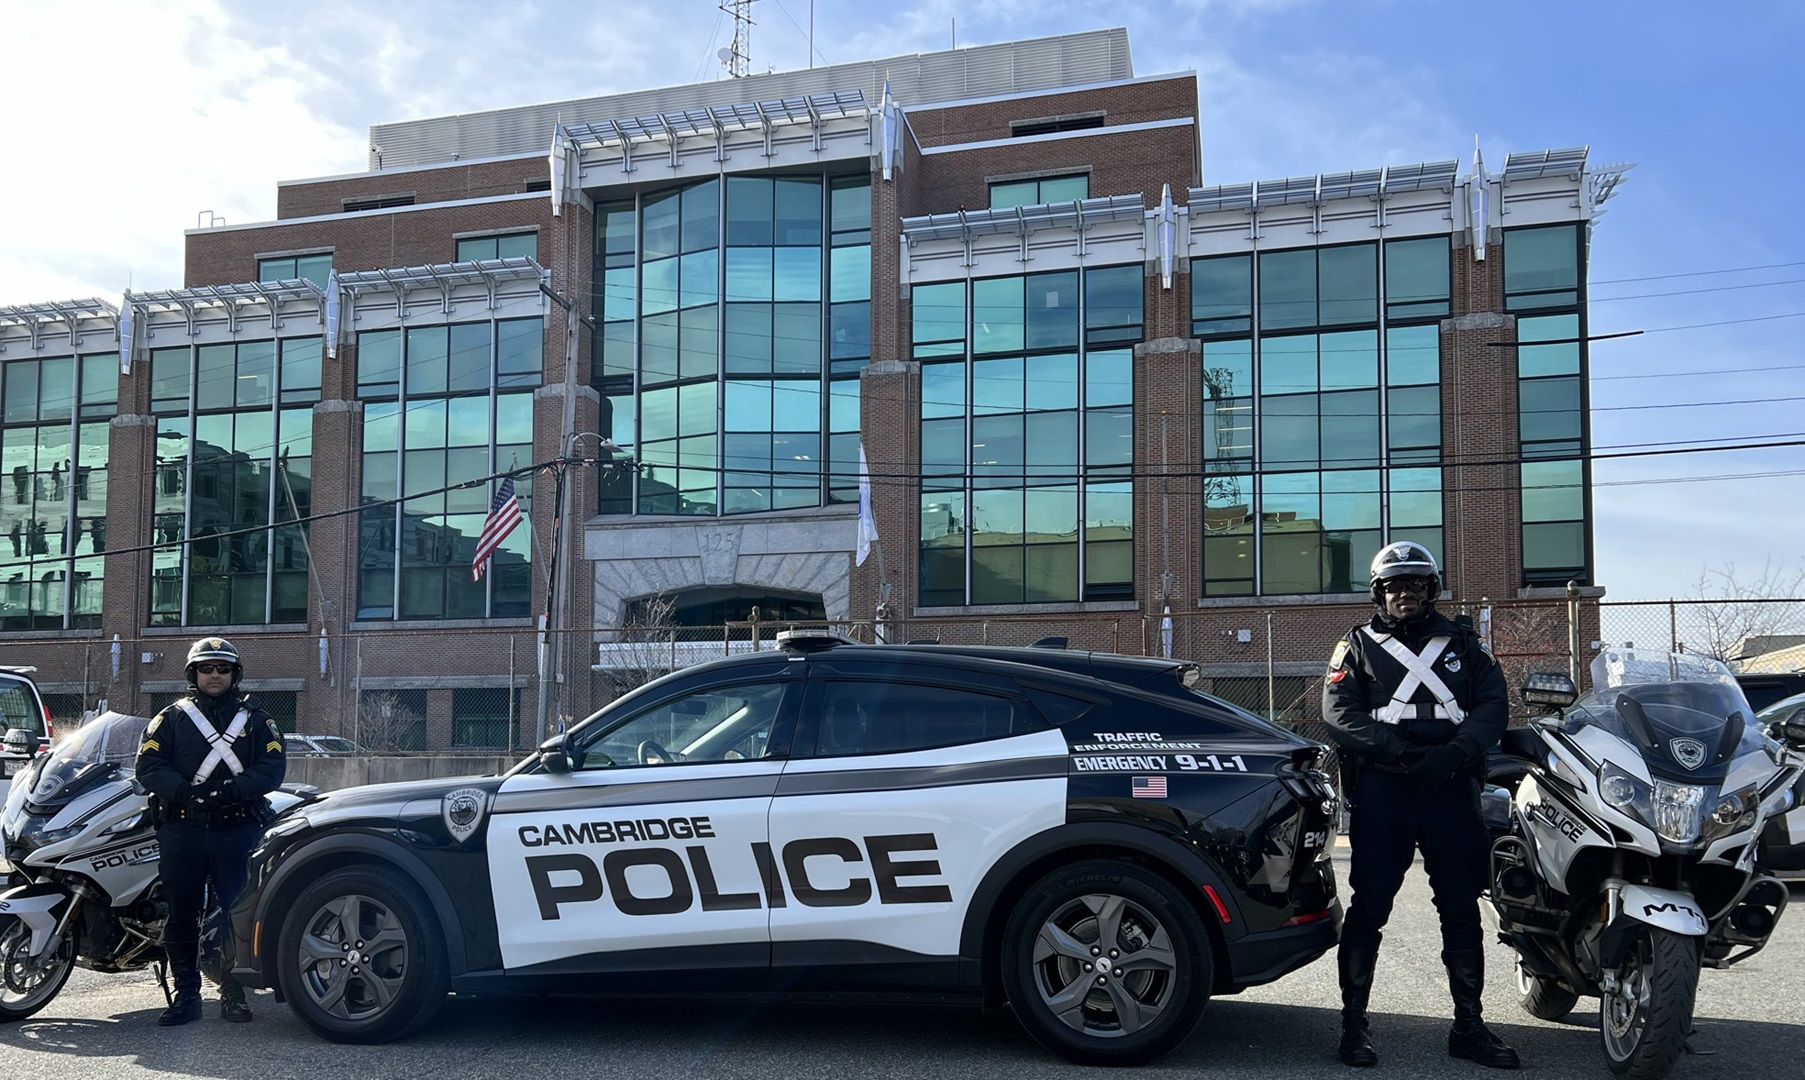 Cambridge Police Adds First AllElectric Vehicles